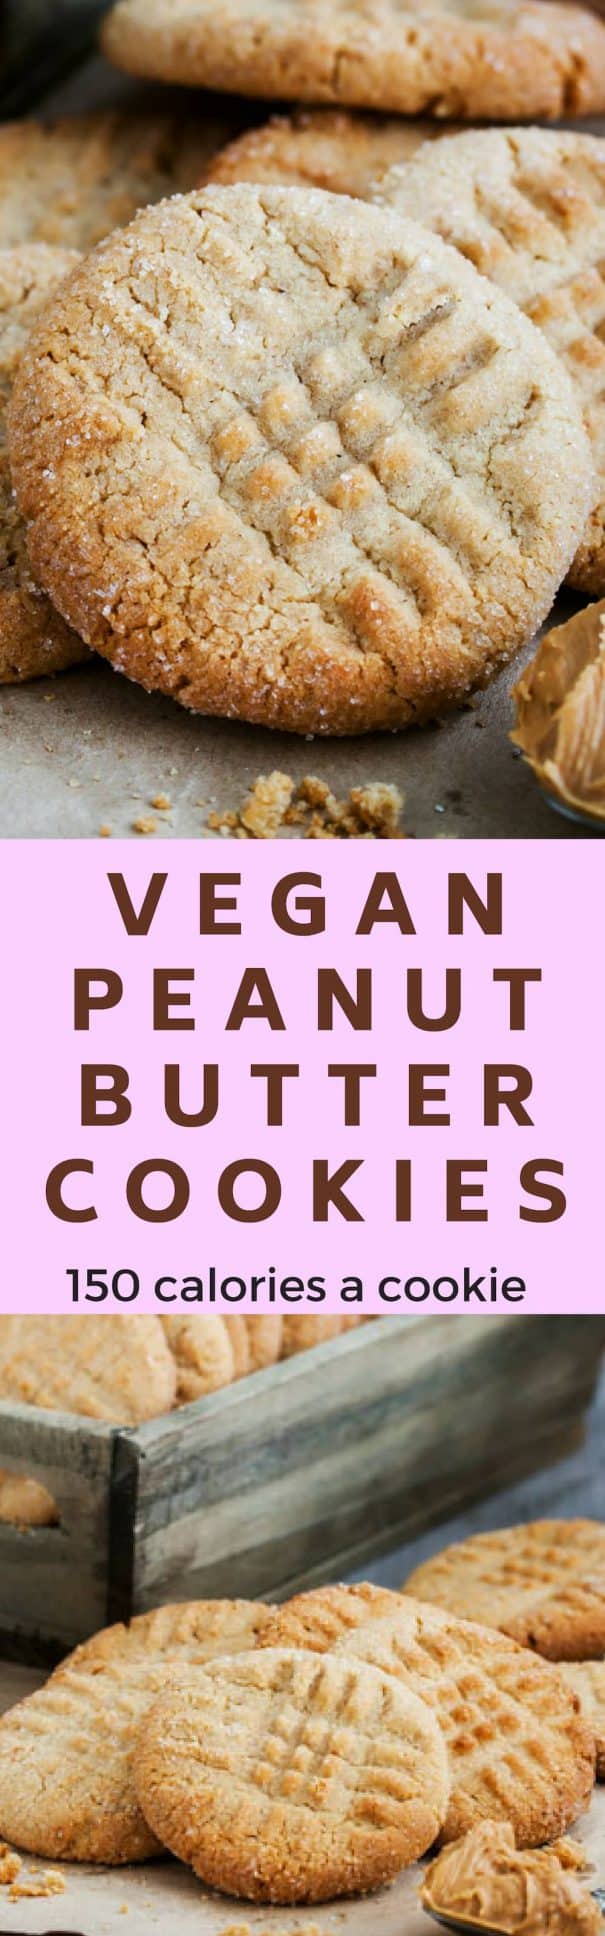 Super soft vegan peanut butter cookies recipe!  This easy 1 bowl vegan cookies recipe makes 18 cookies, each at 150 calories, making them a guilt free dessert!  Cookies are ready in 12 minutes!  